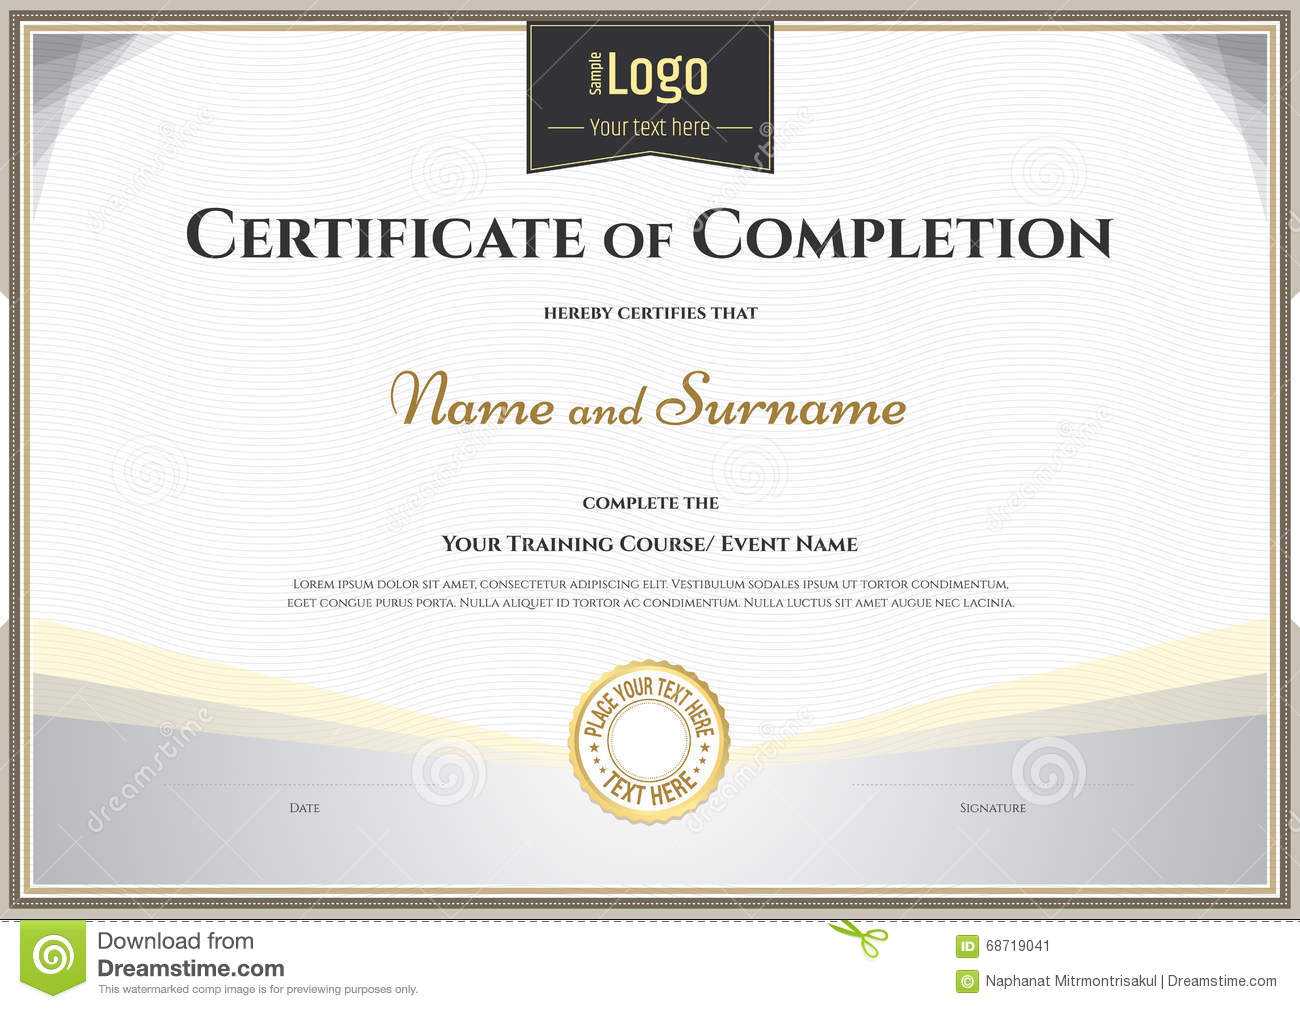 Certificate Of Completion Template In Vector For Achievement Inside Blank Certificate Of Achievement Template